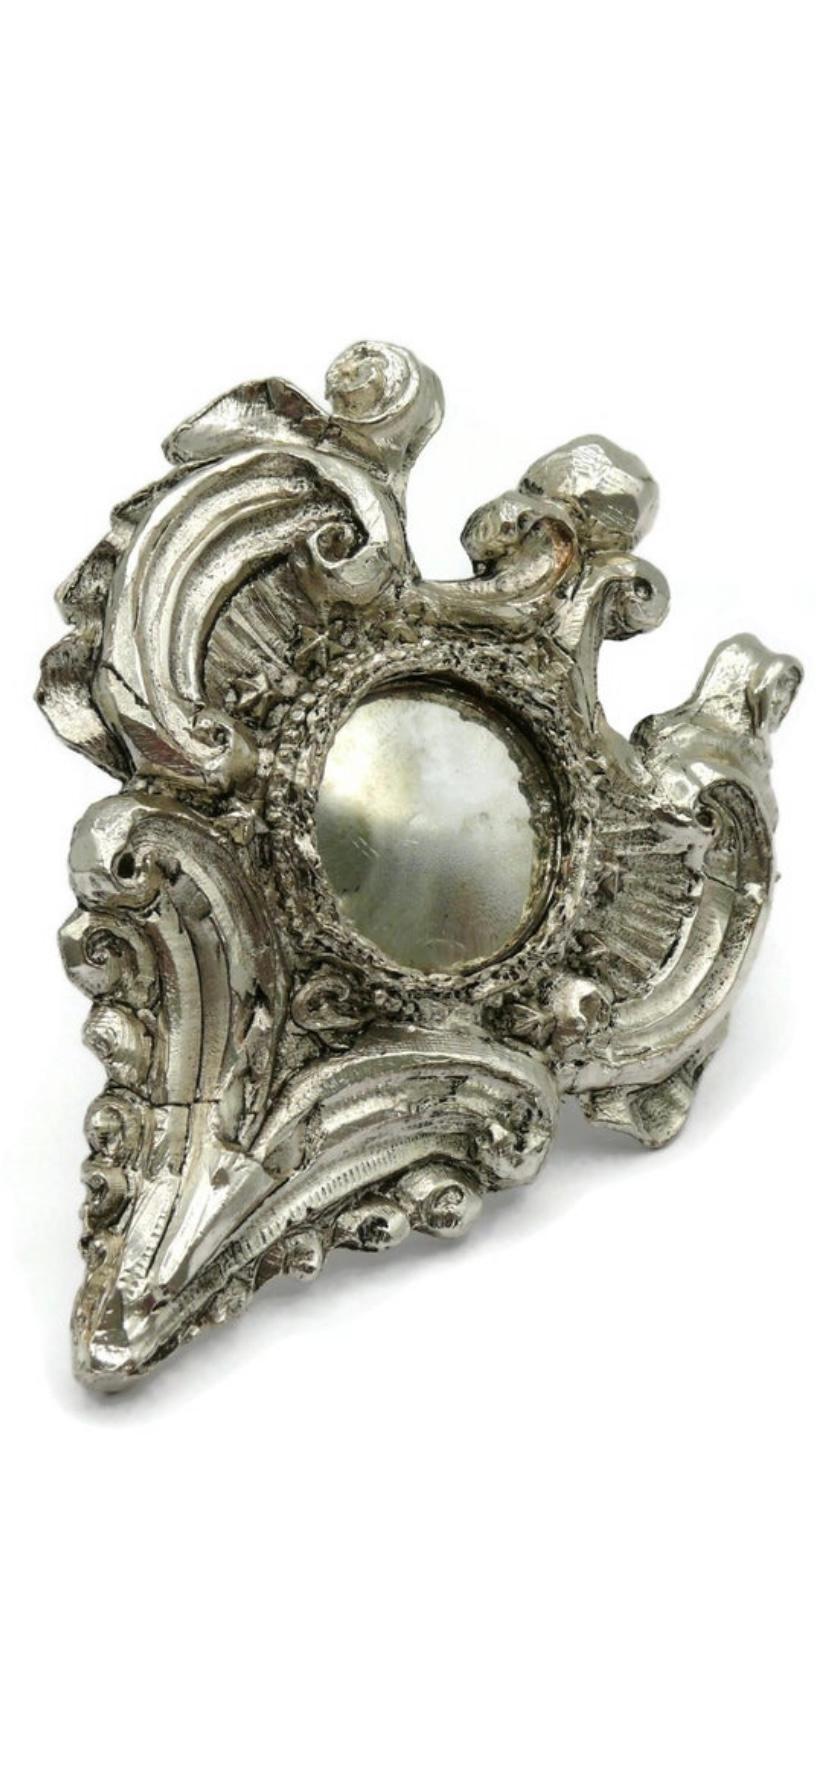 Rare CHRISTIAN LACROIX vintage silver plated Brooch in the shape of a medallion with a little »sorcière » mirror.

Can be used as a brooch or pendant.

Embossed Noel 2007 (for « Christmas 2007 »)

Sign : CL (Christian Lacroix)

Indicative